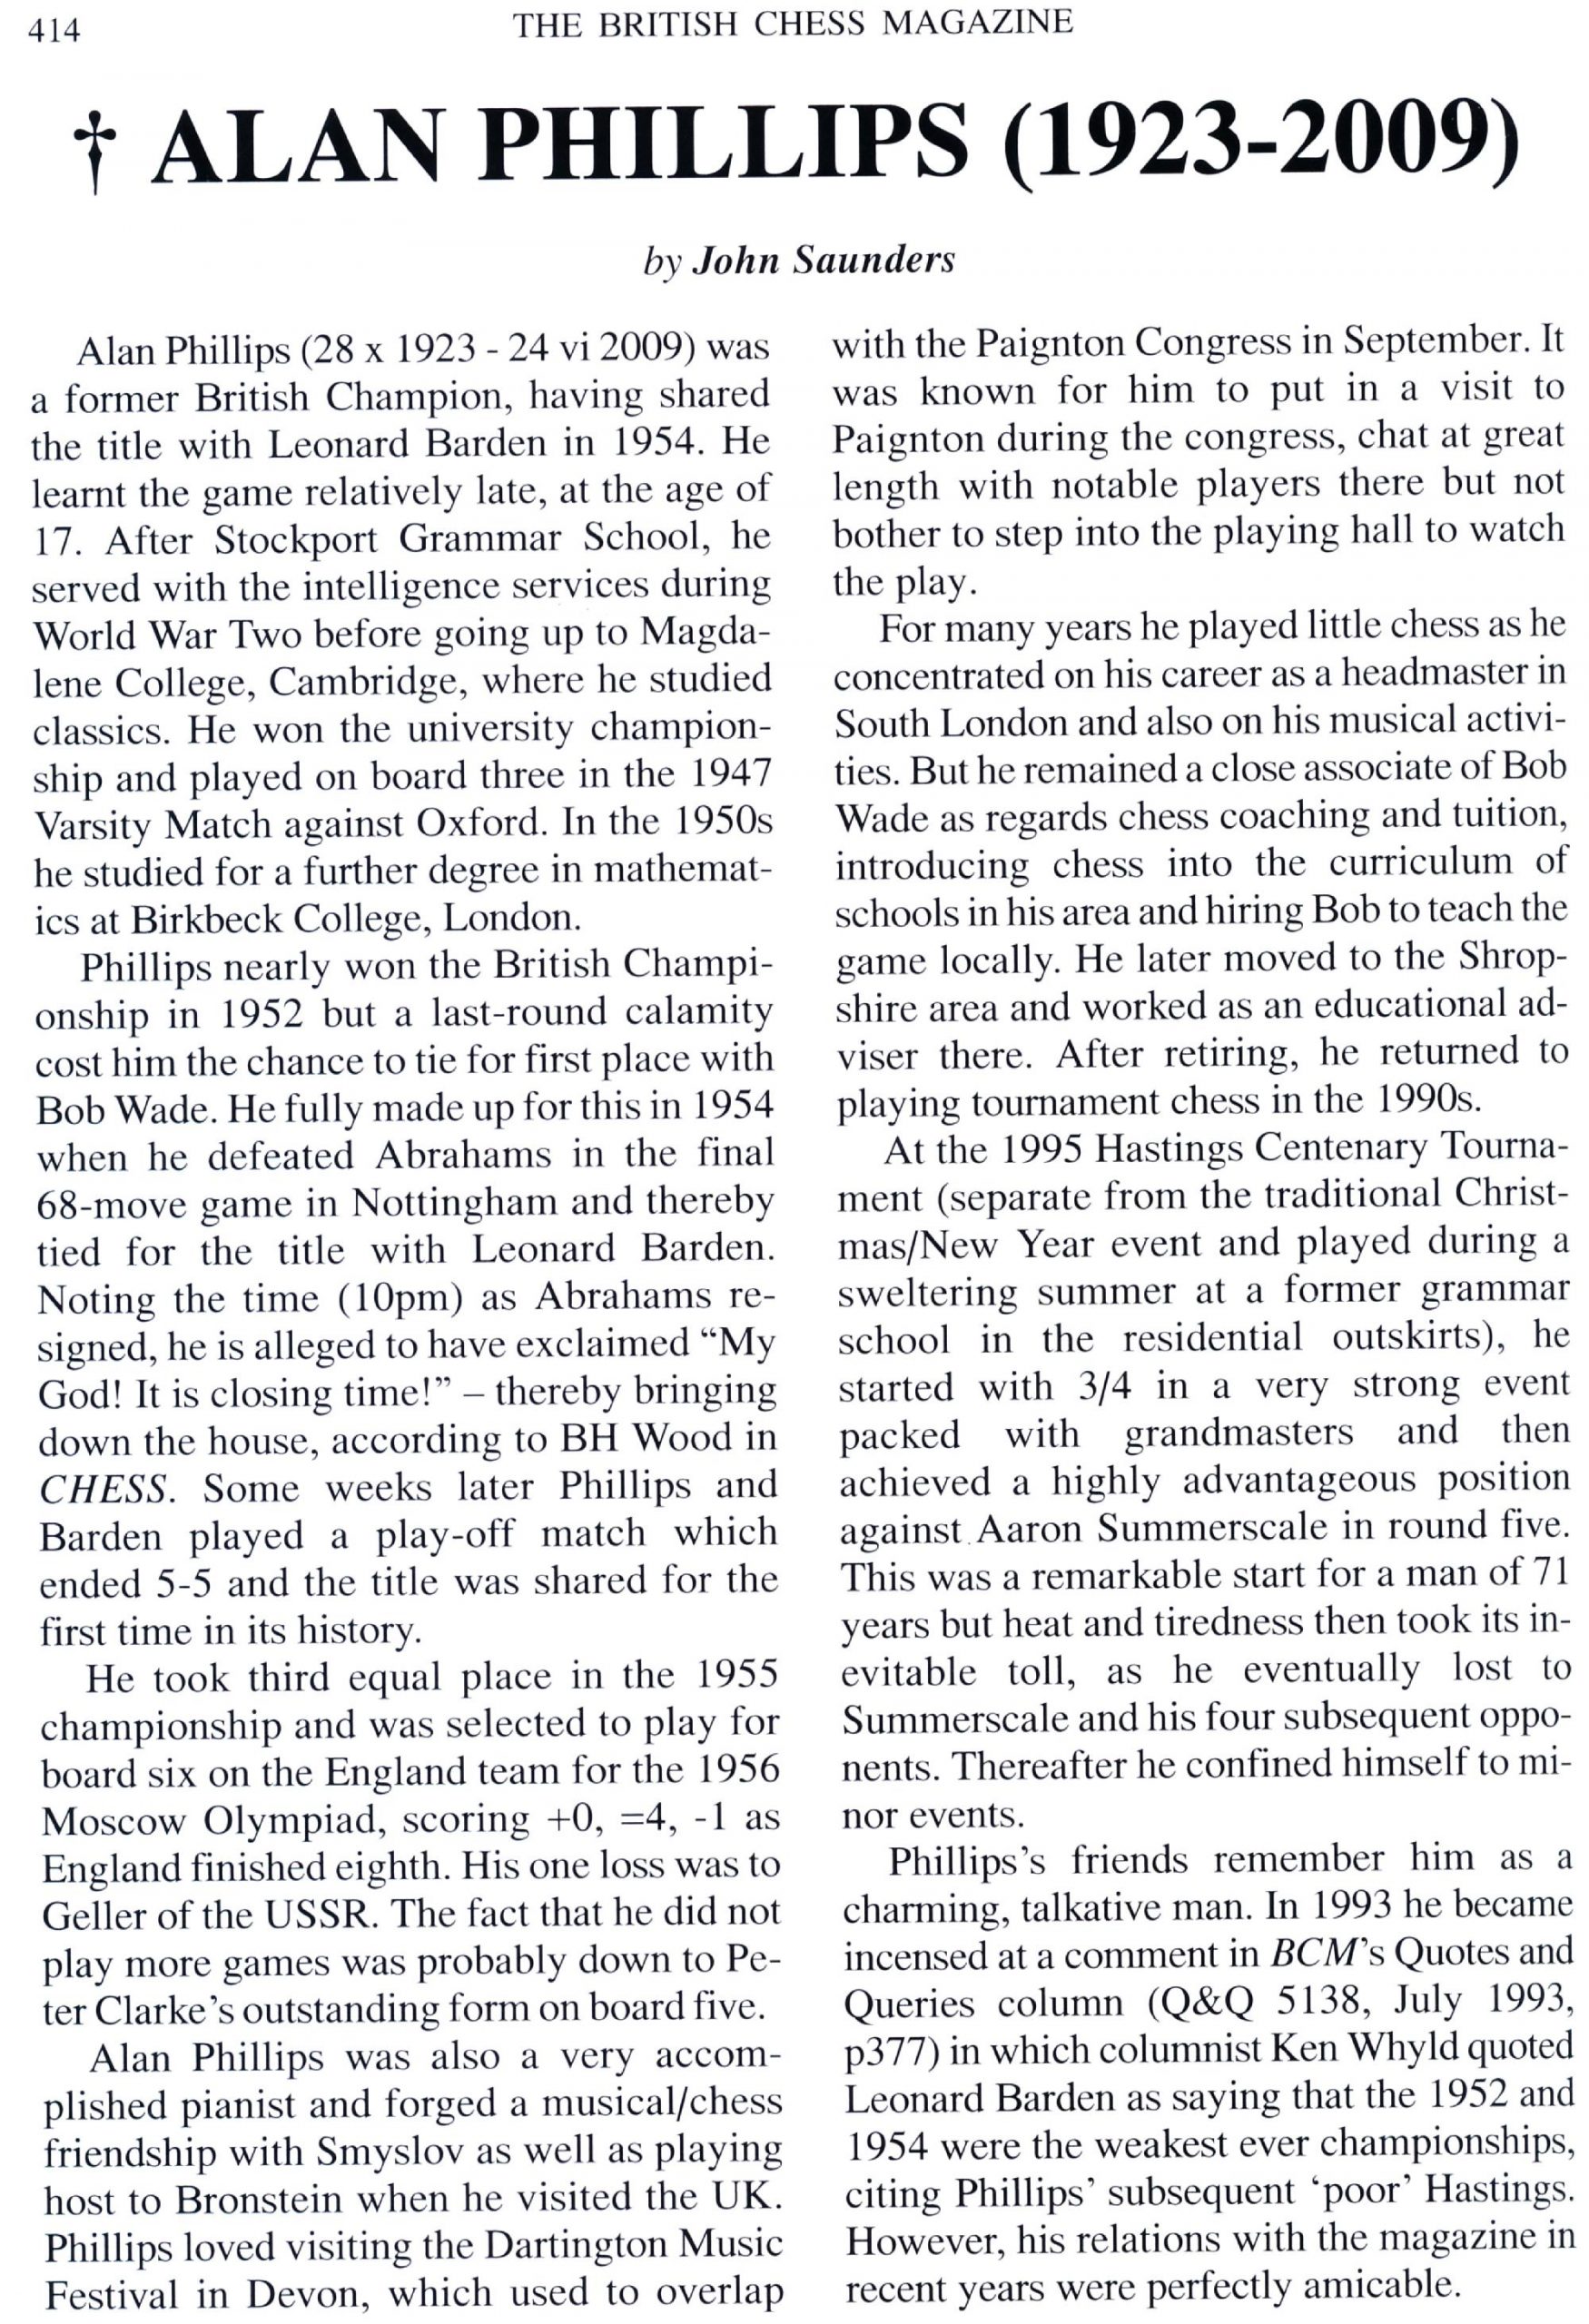 Obituary of Alan Phillips by John Saunders from British Chess Magazine, 2009. Part One